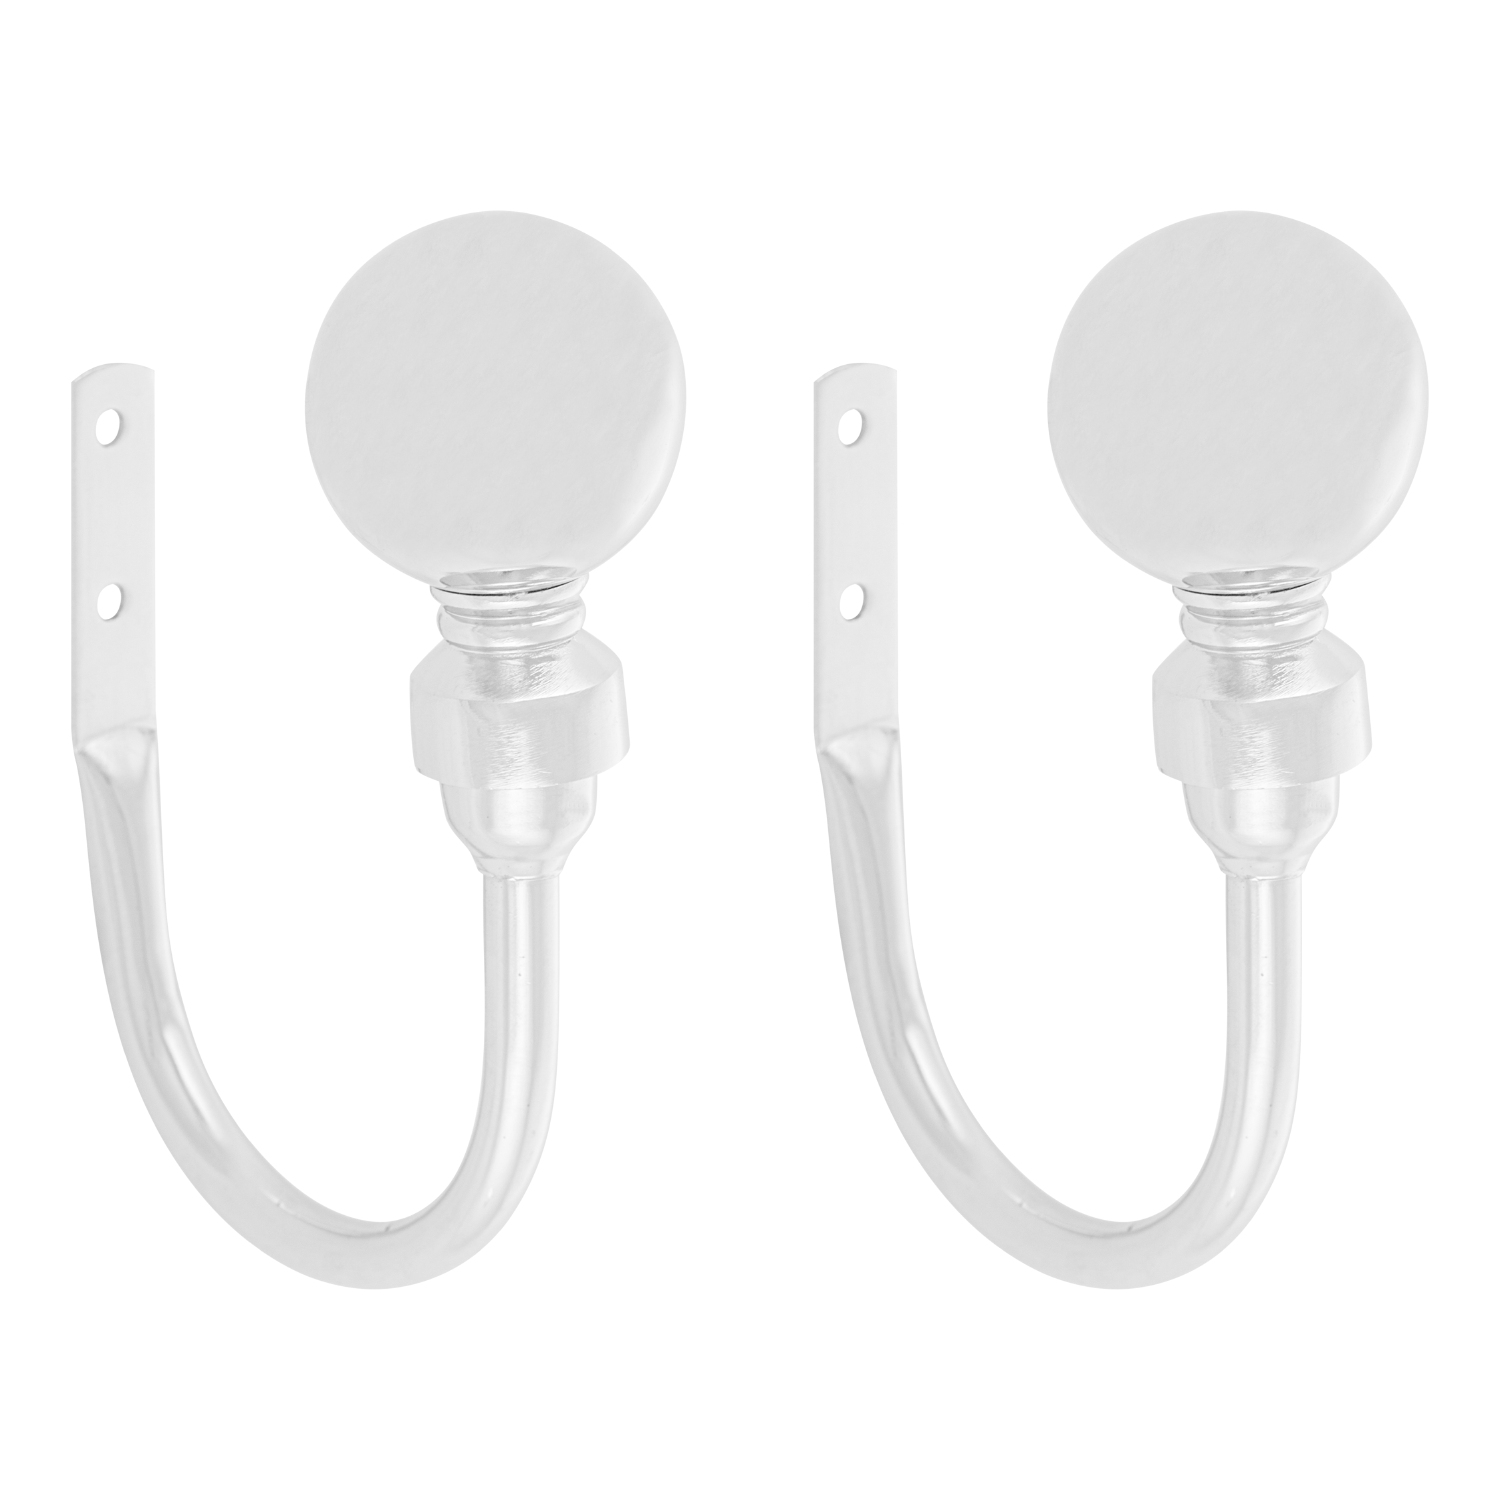 Trends Bali Chrome Curtain Tie Back 2 Pack Image 2